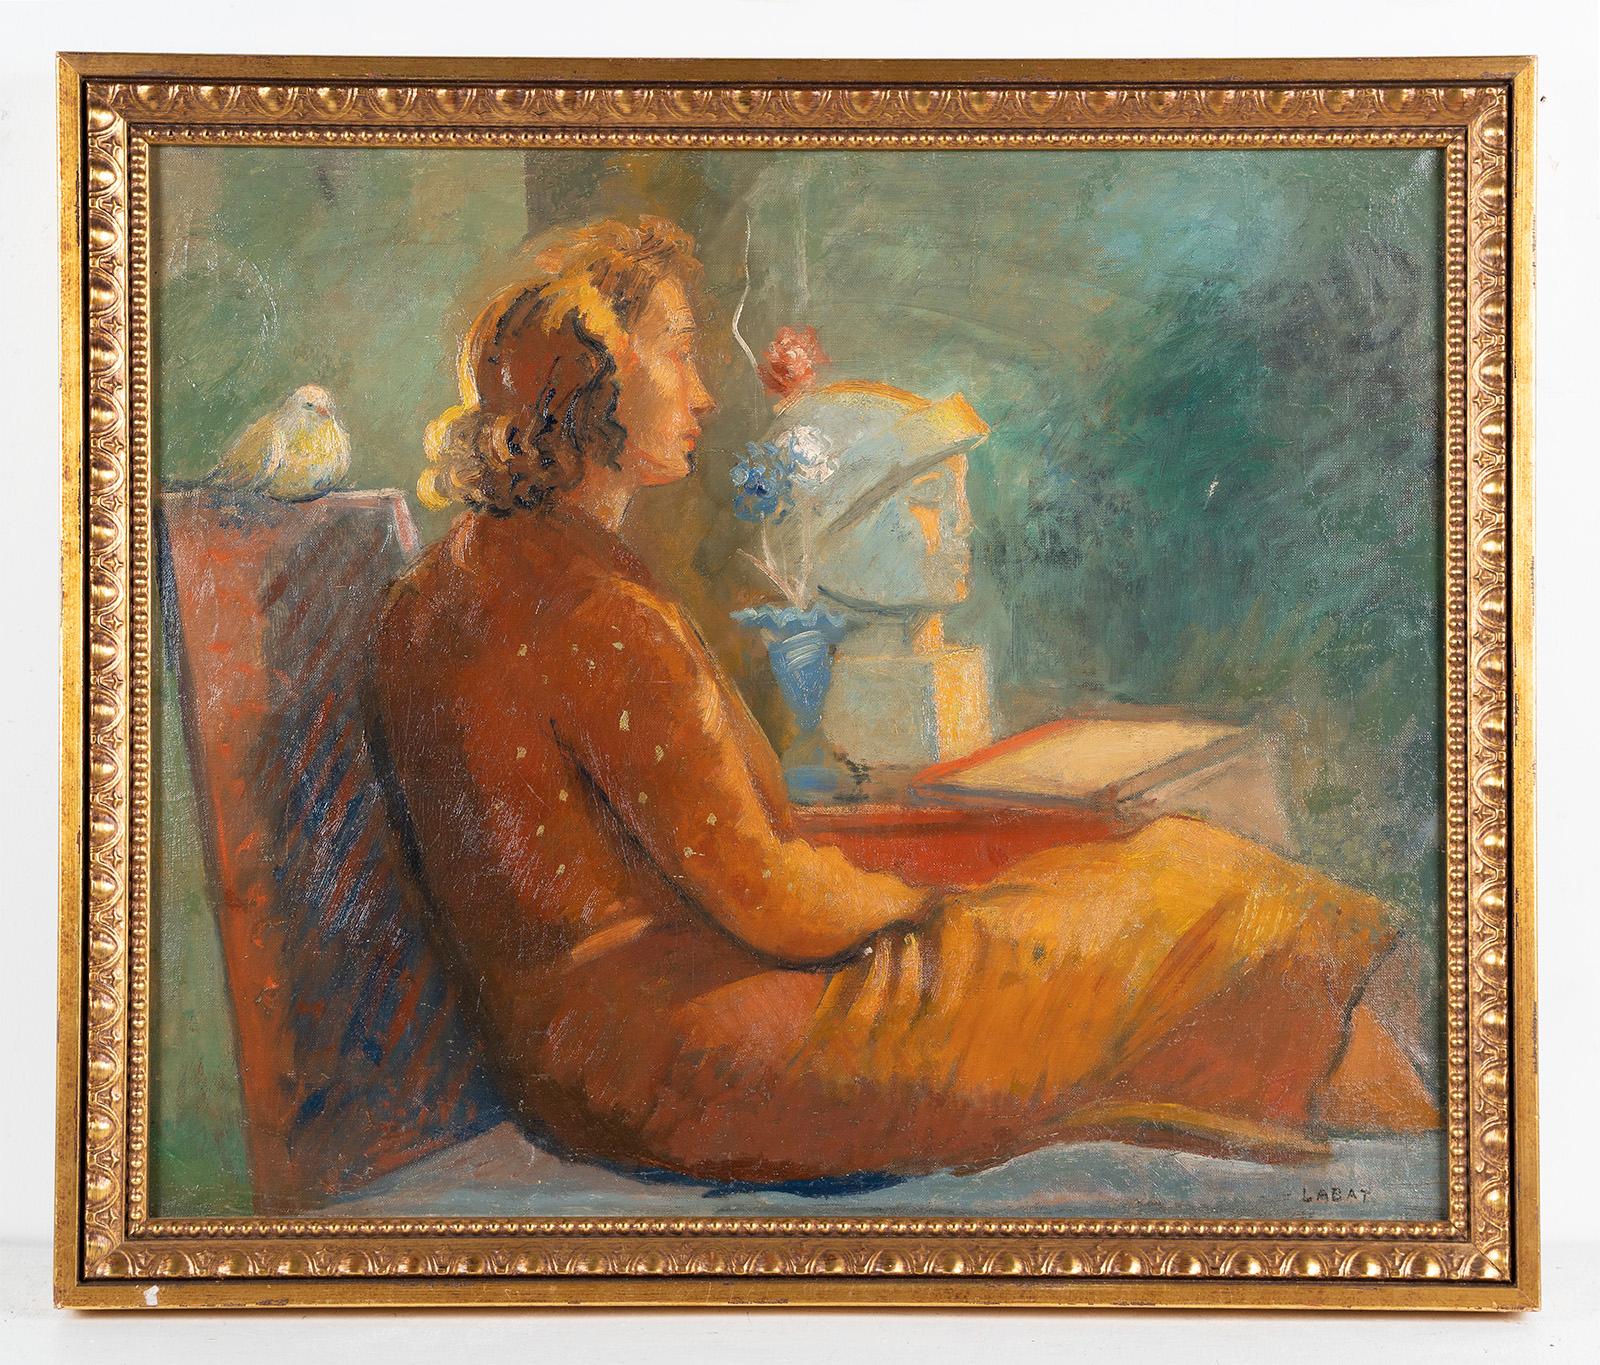 Finely painted American modernist portrait.  Signed lower right.  Nicely framed.  Oil on canvas.  Image size, 24H x 29L.
